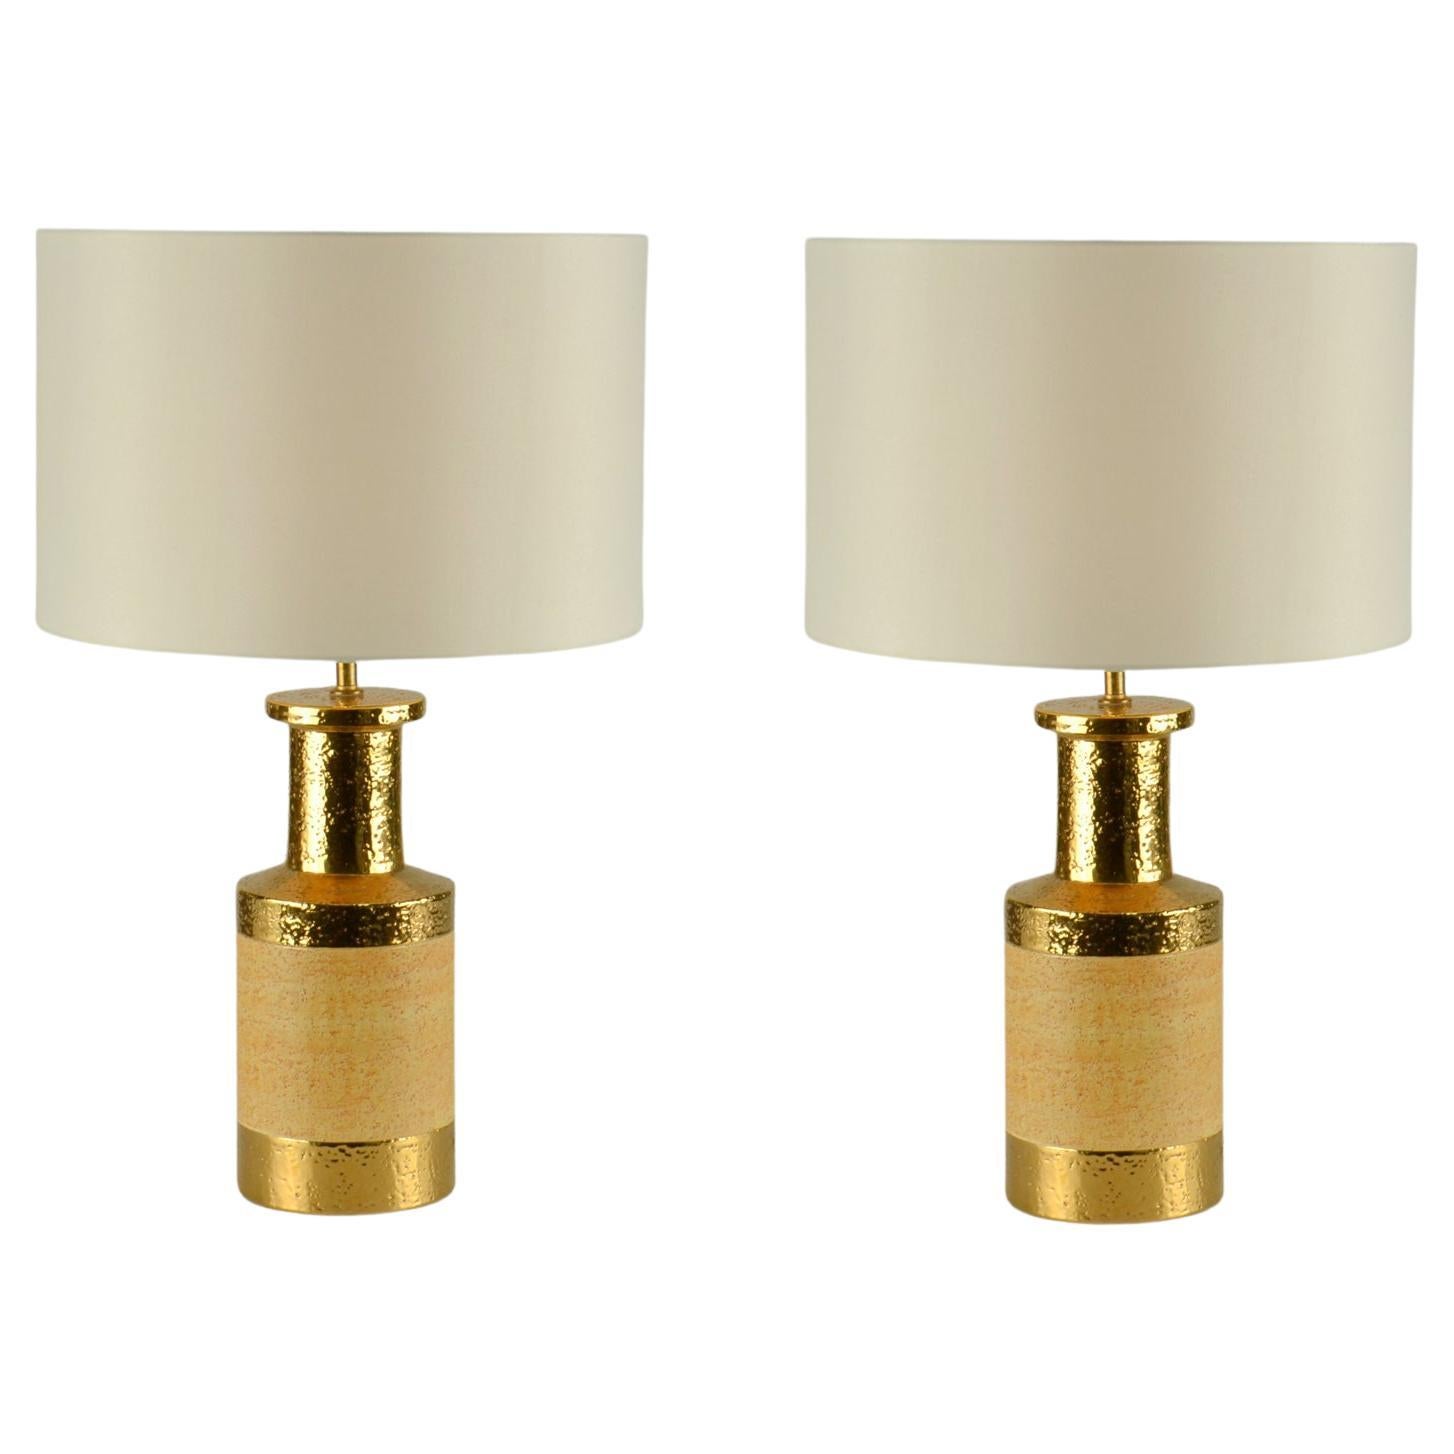 Pair of Bitossi Gilded Stoneware Ceramic Table Lamps, Italy 1970s For Sale